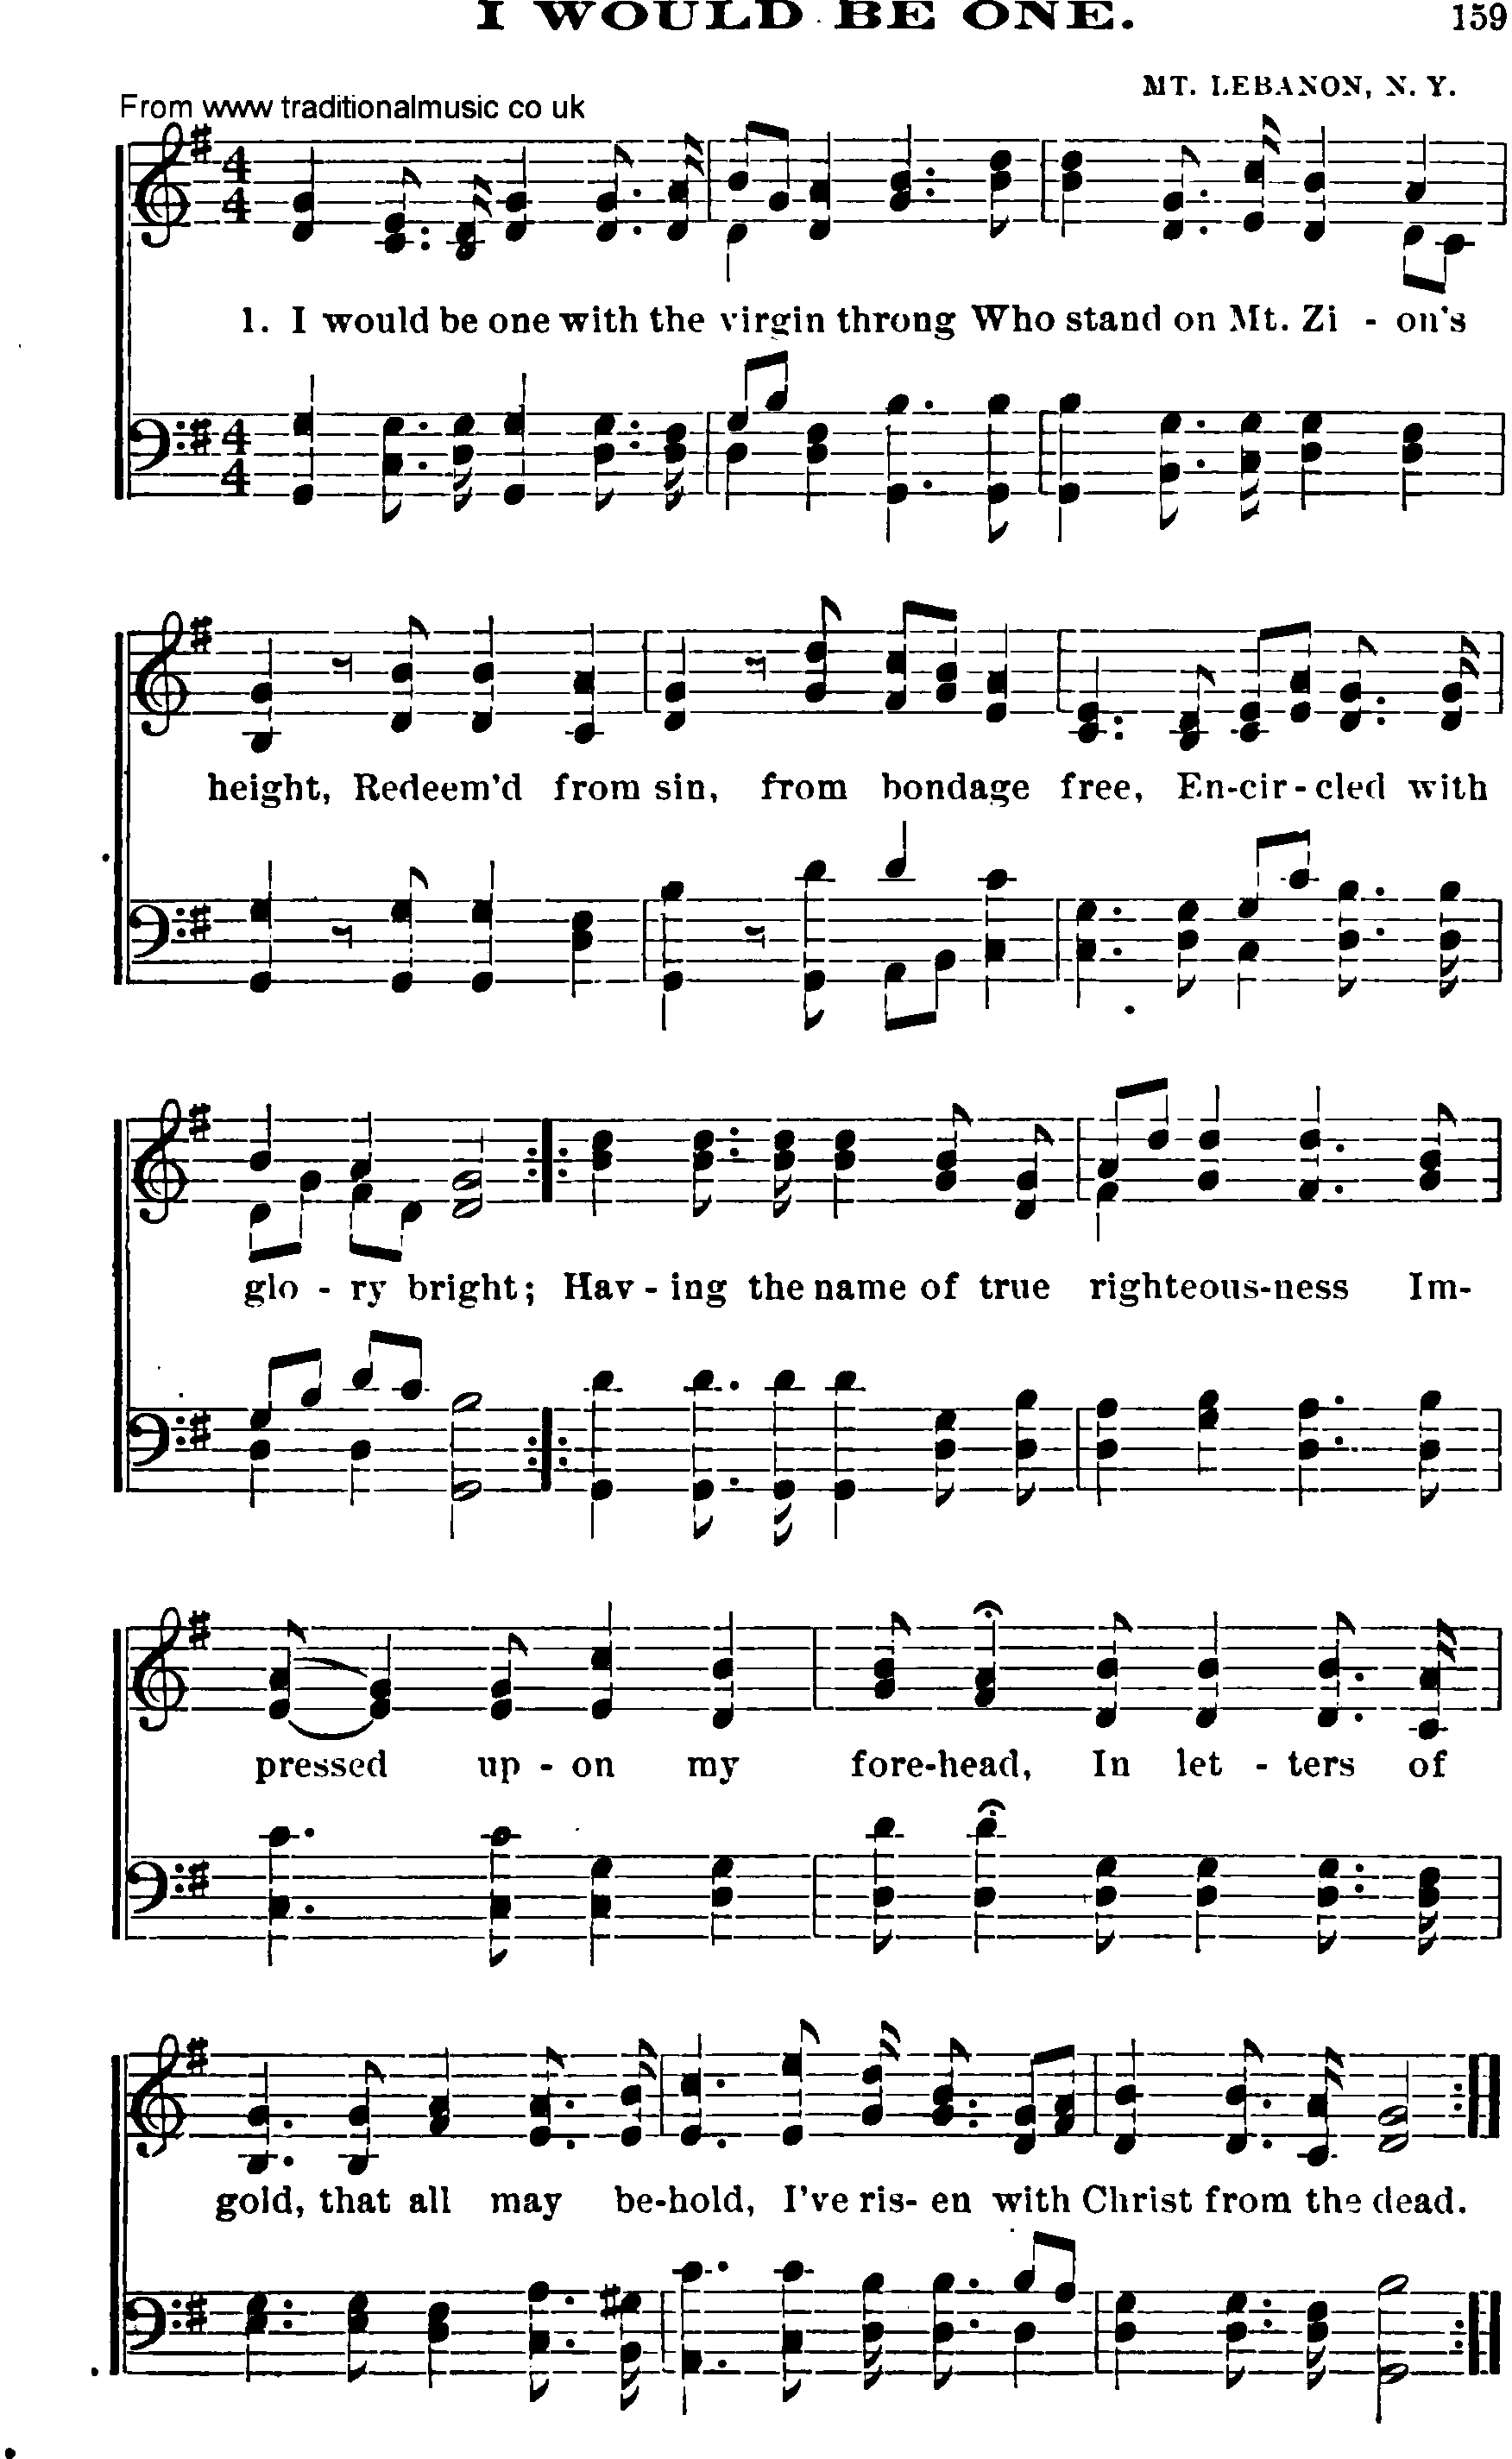 Shaker Music collection, Hymn: i would be one, sheetmusic and PDF